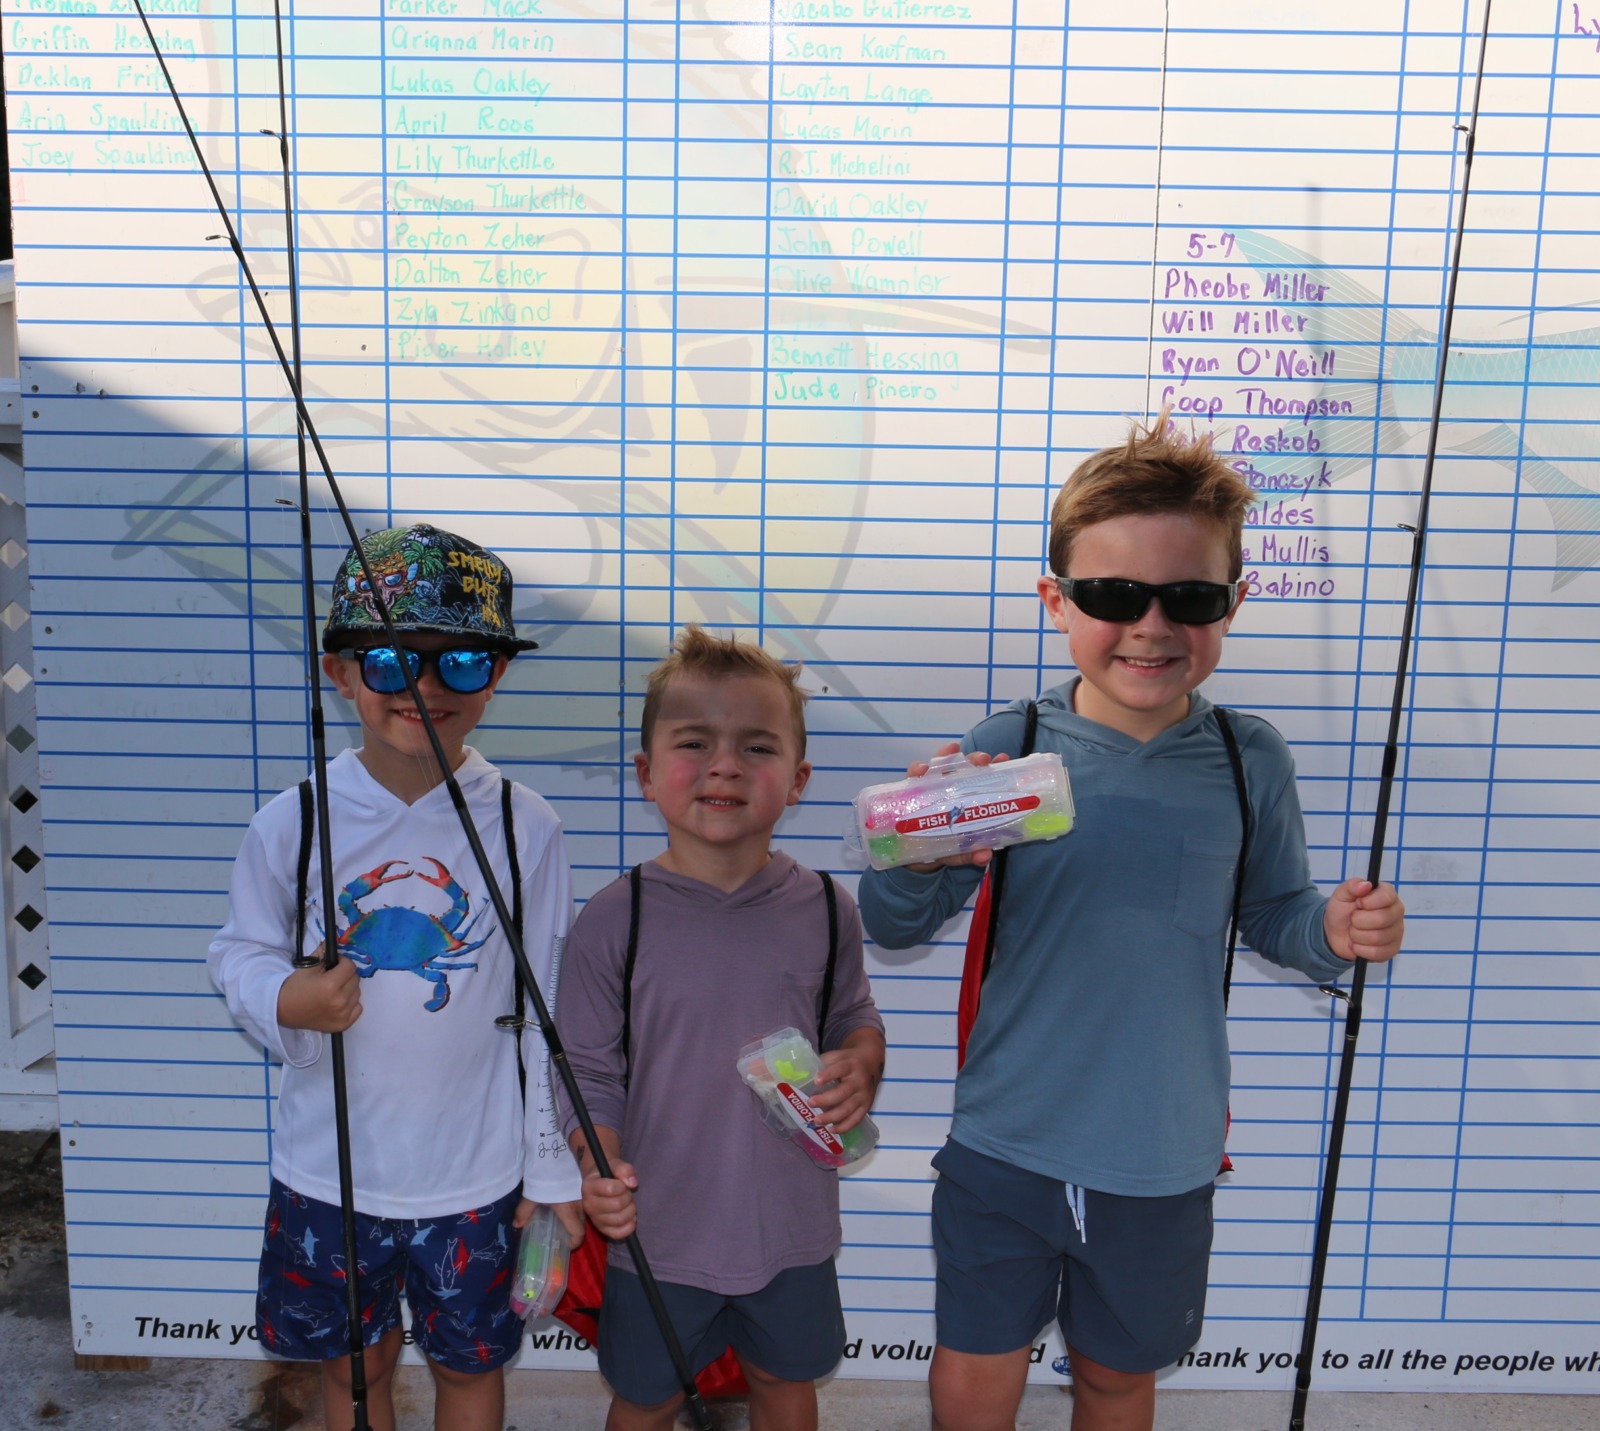 KEYS KIDS FISH: 26TH ANNUAL DERBY IN ISLAMORADA IS FREE TO YOUNG LOCAL  ANGLERS